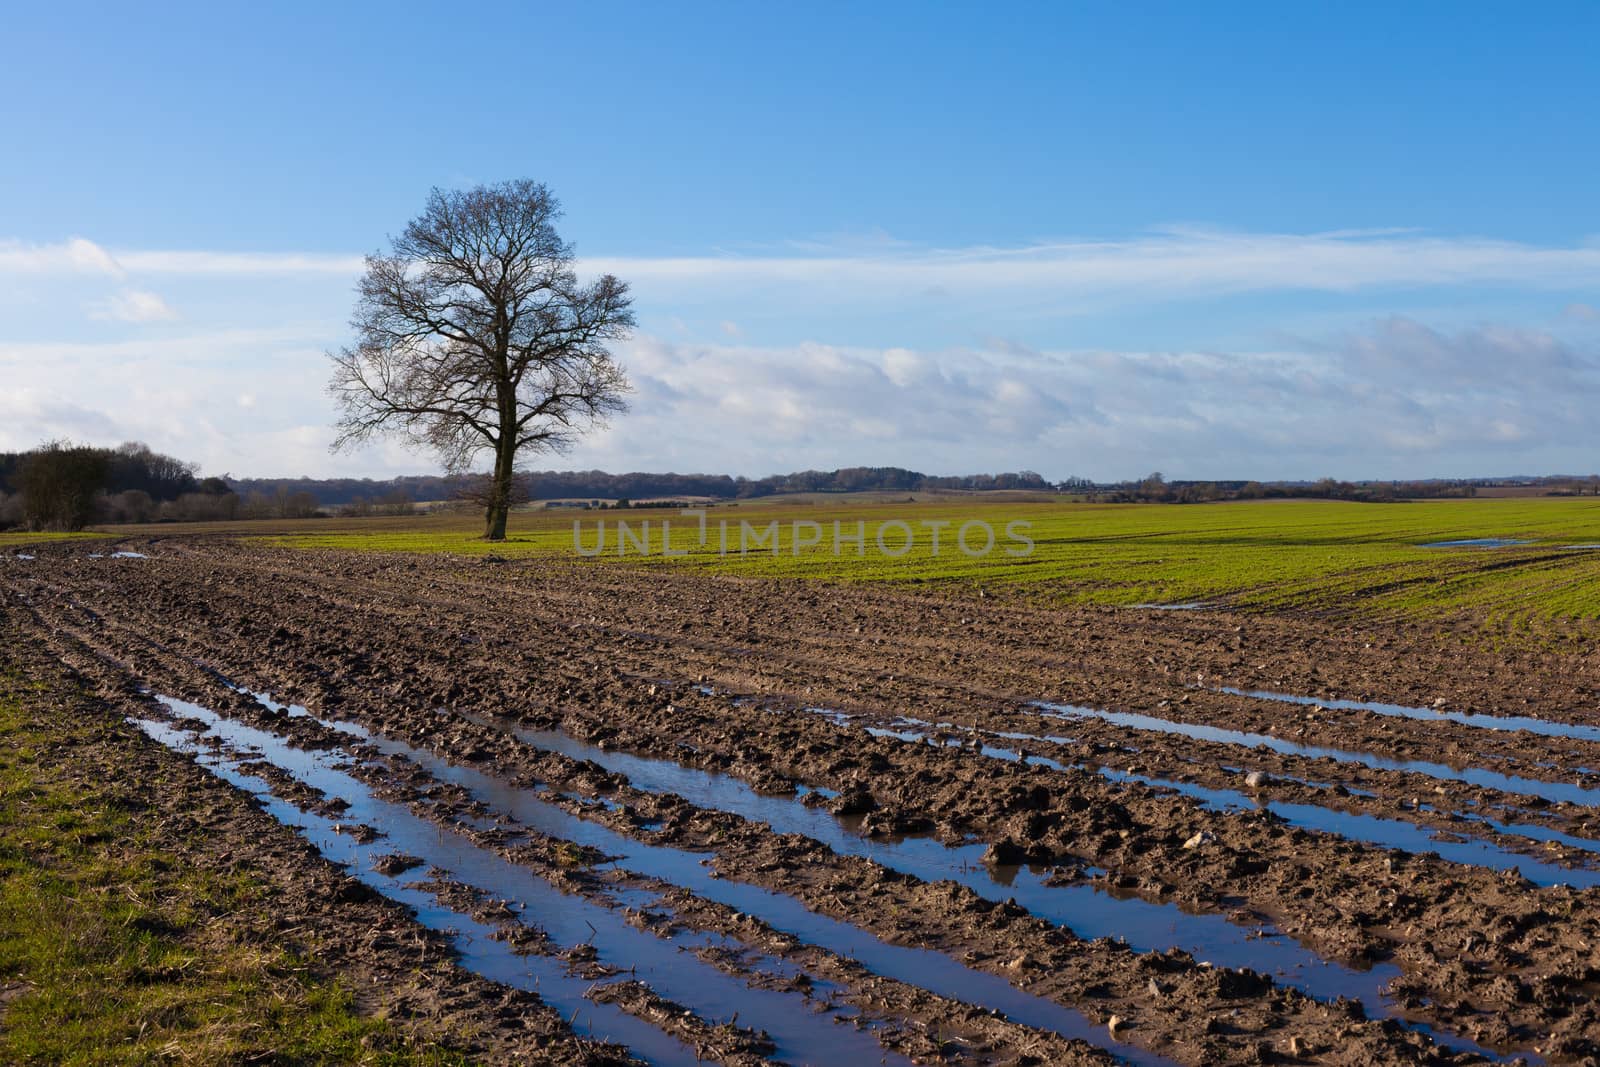 Bare tree in a wet muddy field in Berkshire England. Taken in late winter with a Canon 5D MKII and professionally retouched.
Thanks for looking.